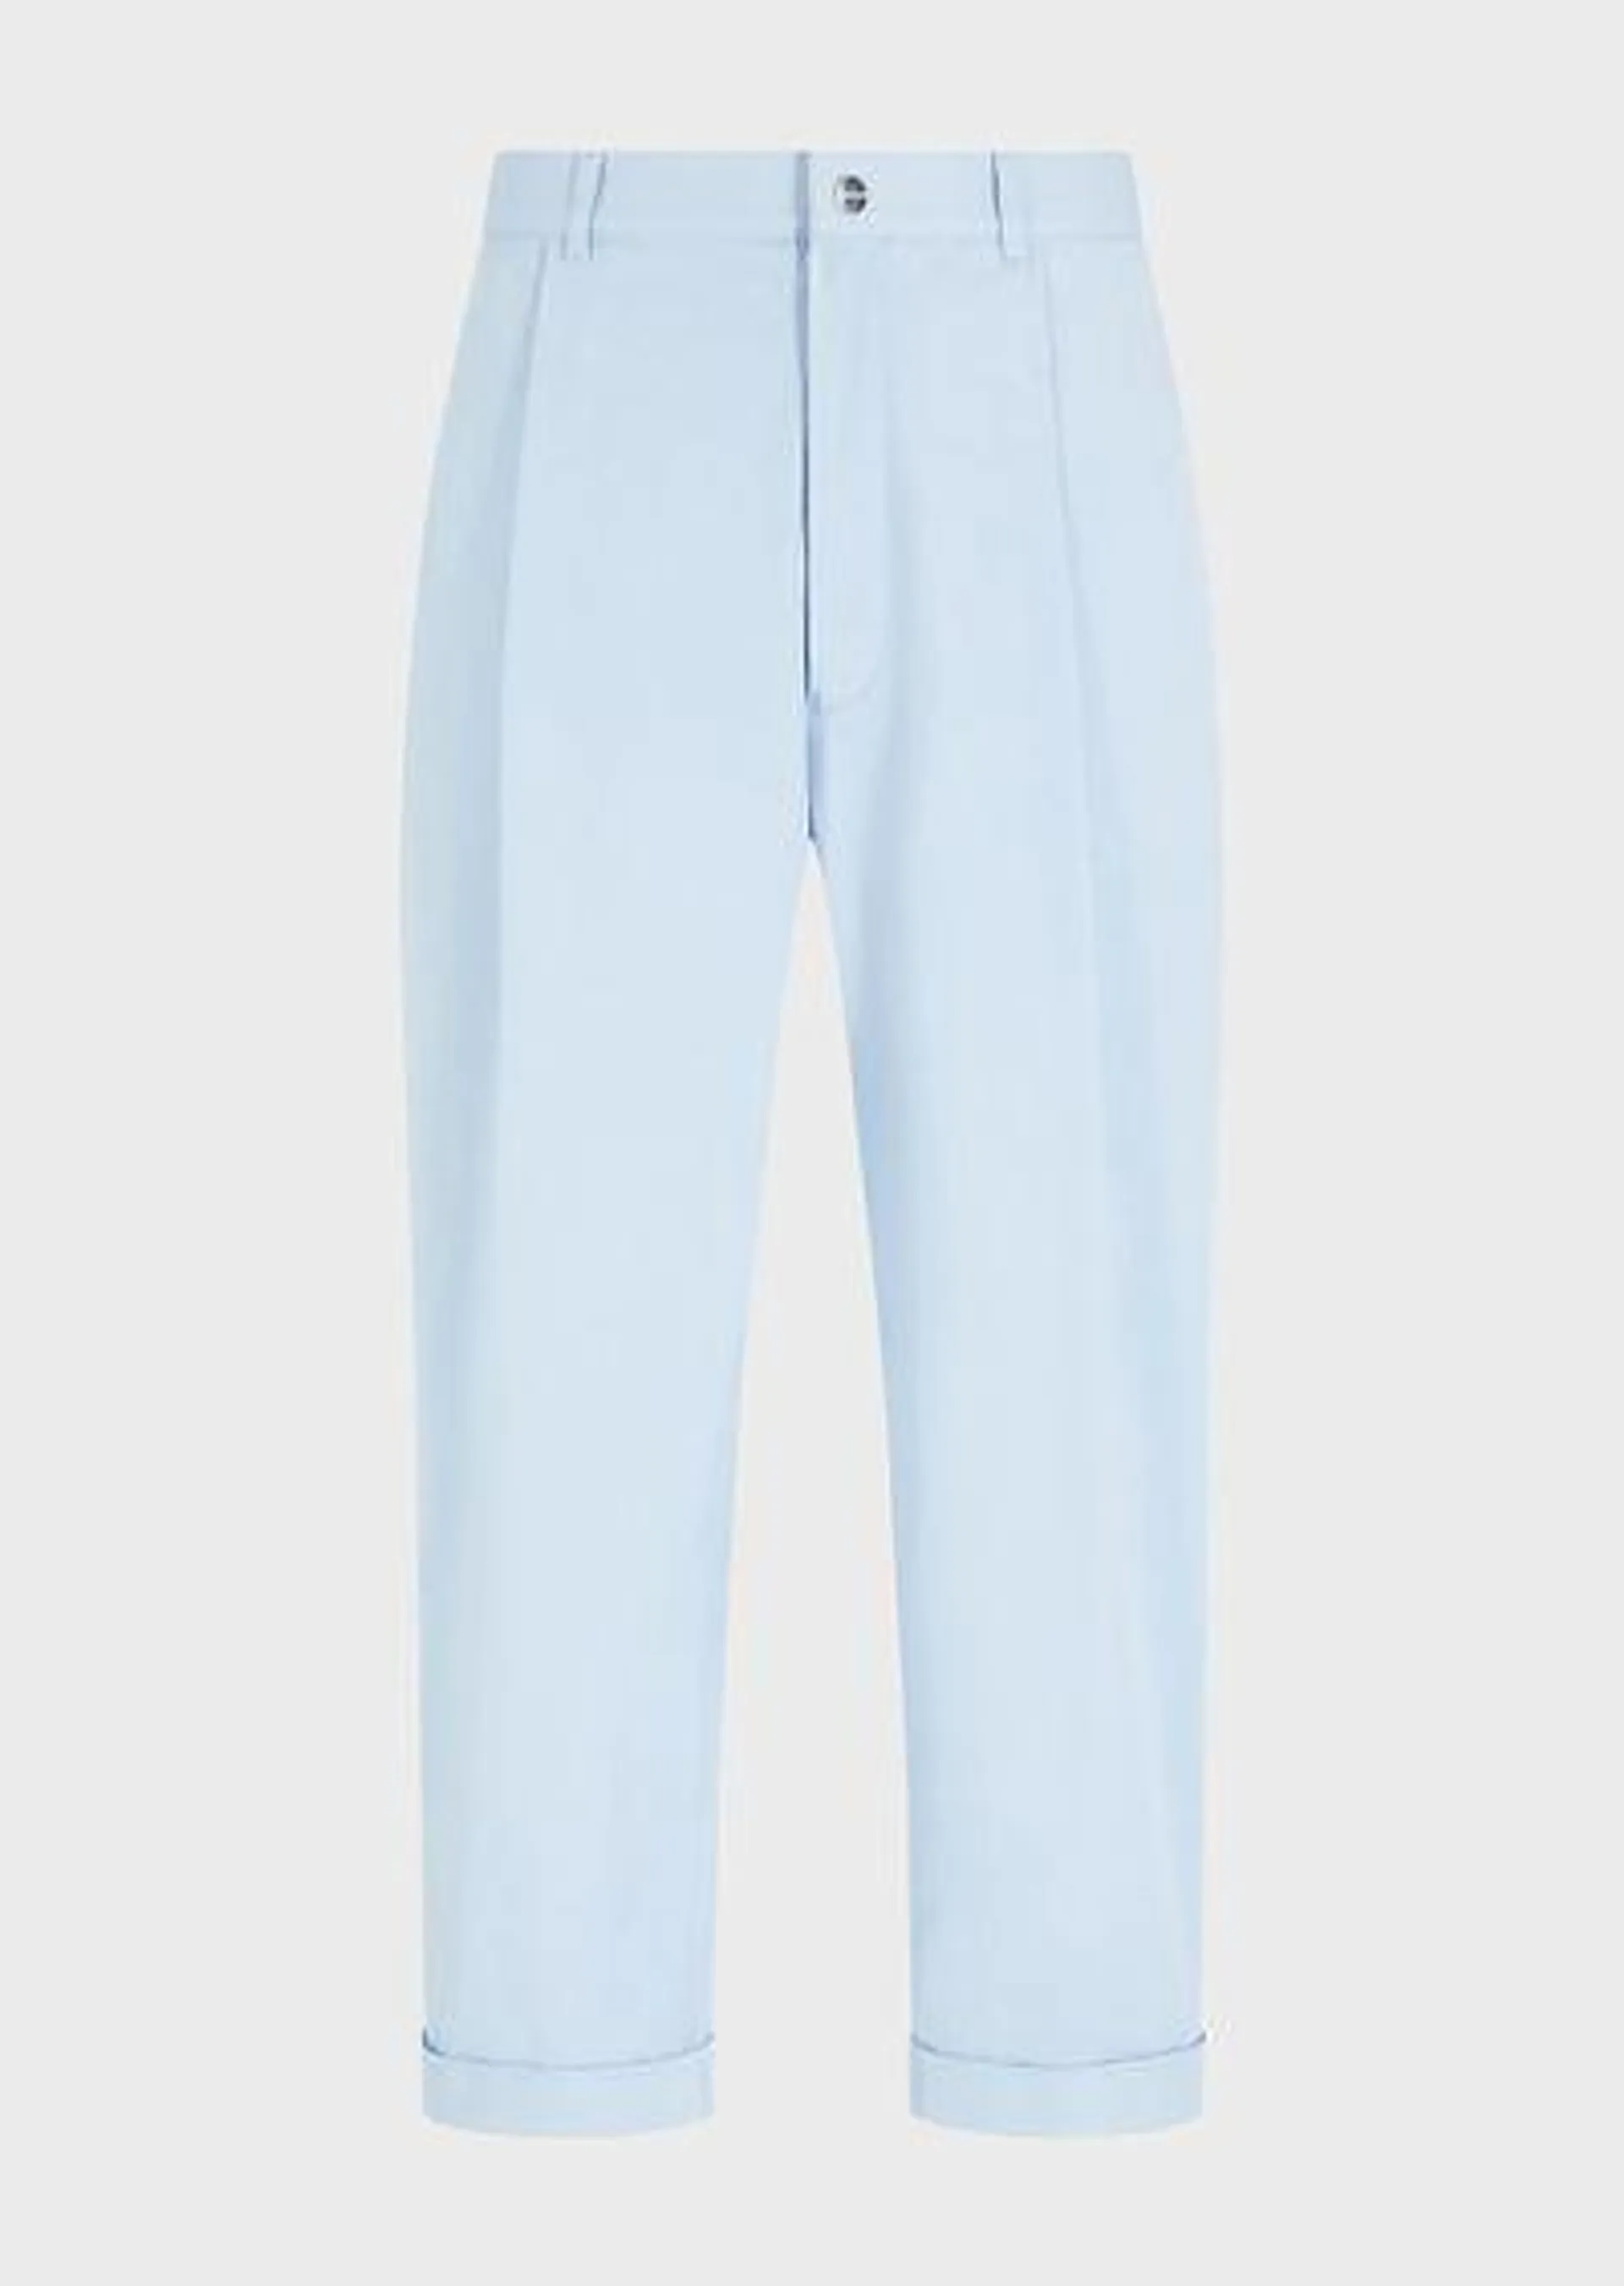 Denim Collection stretch-cotton one-dart trousers